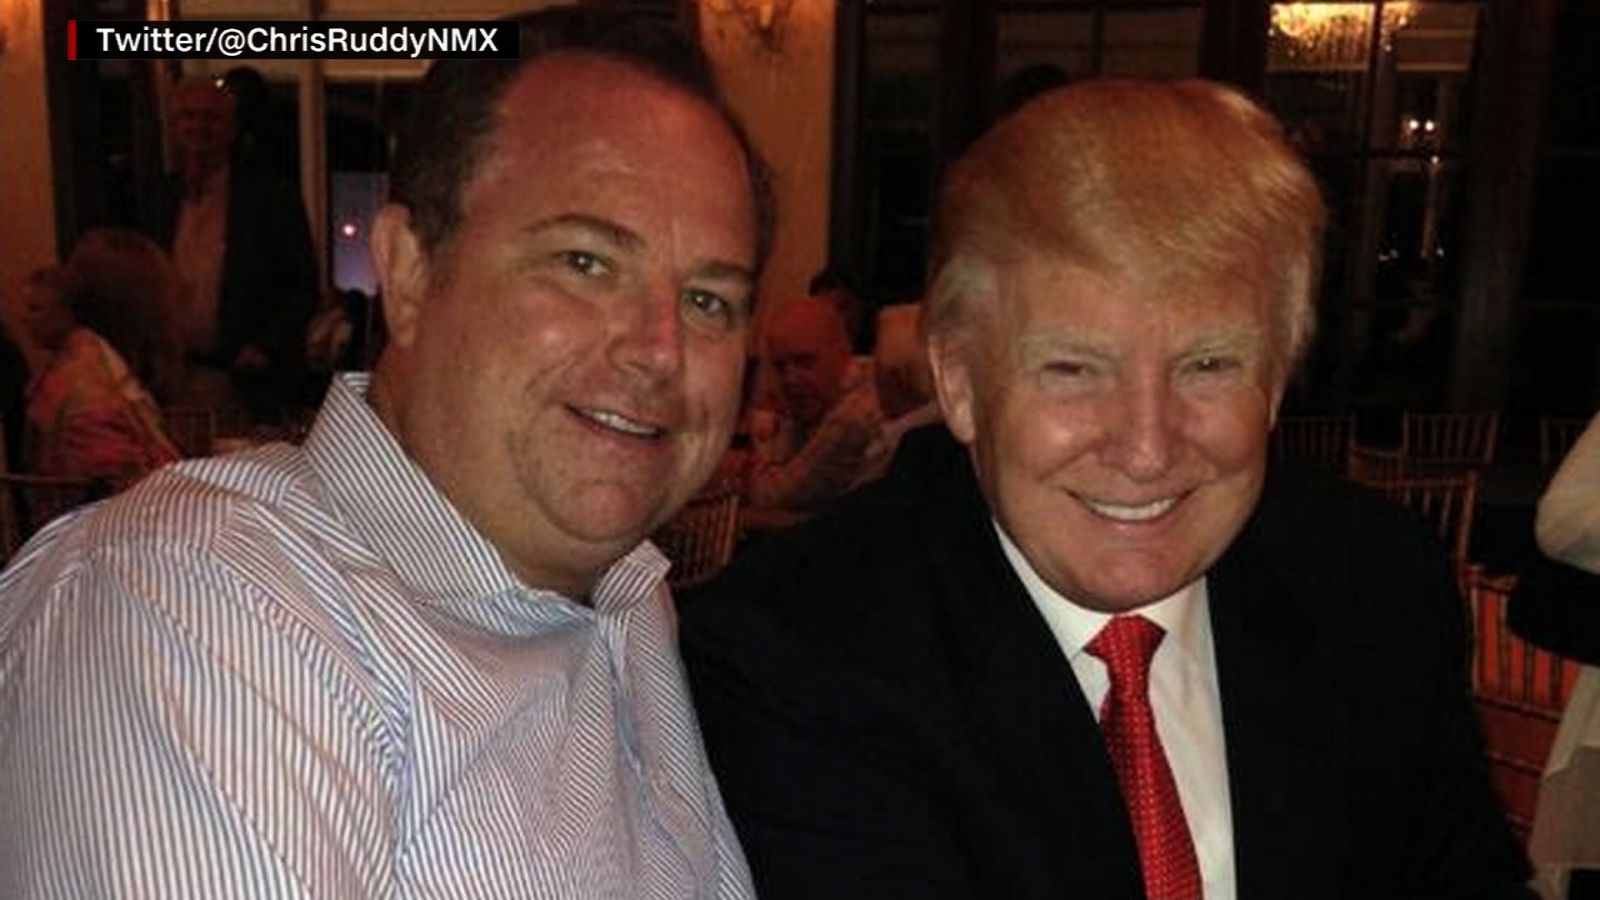 Christopher Ruddy and Donald Trump Together